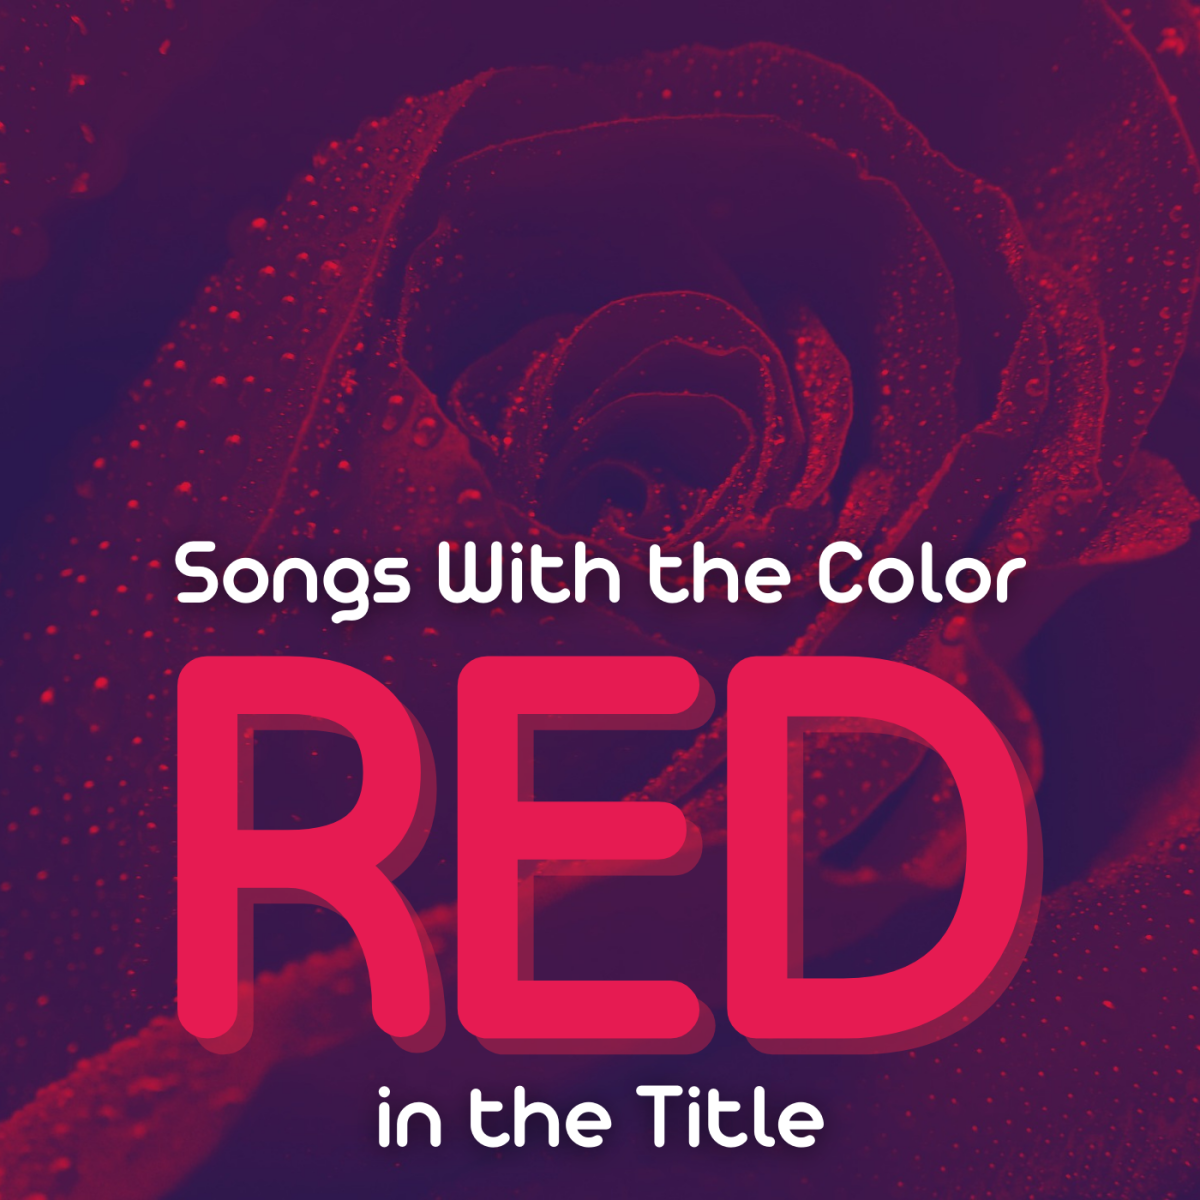 71 Popular Songs With the Color Red in the Title